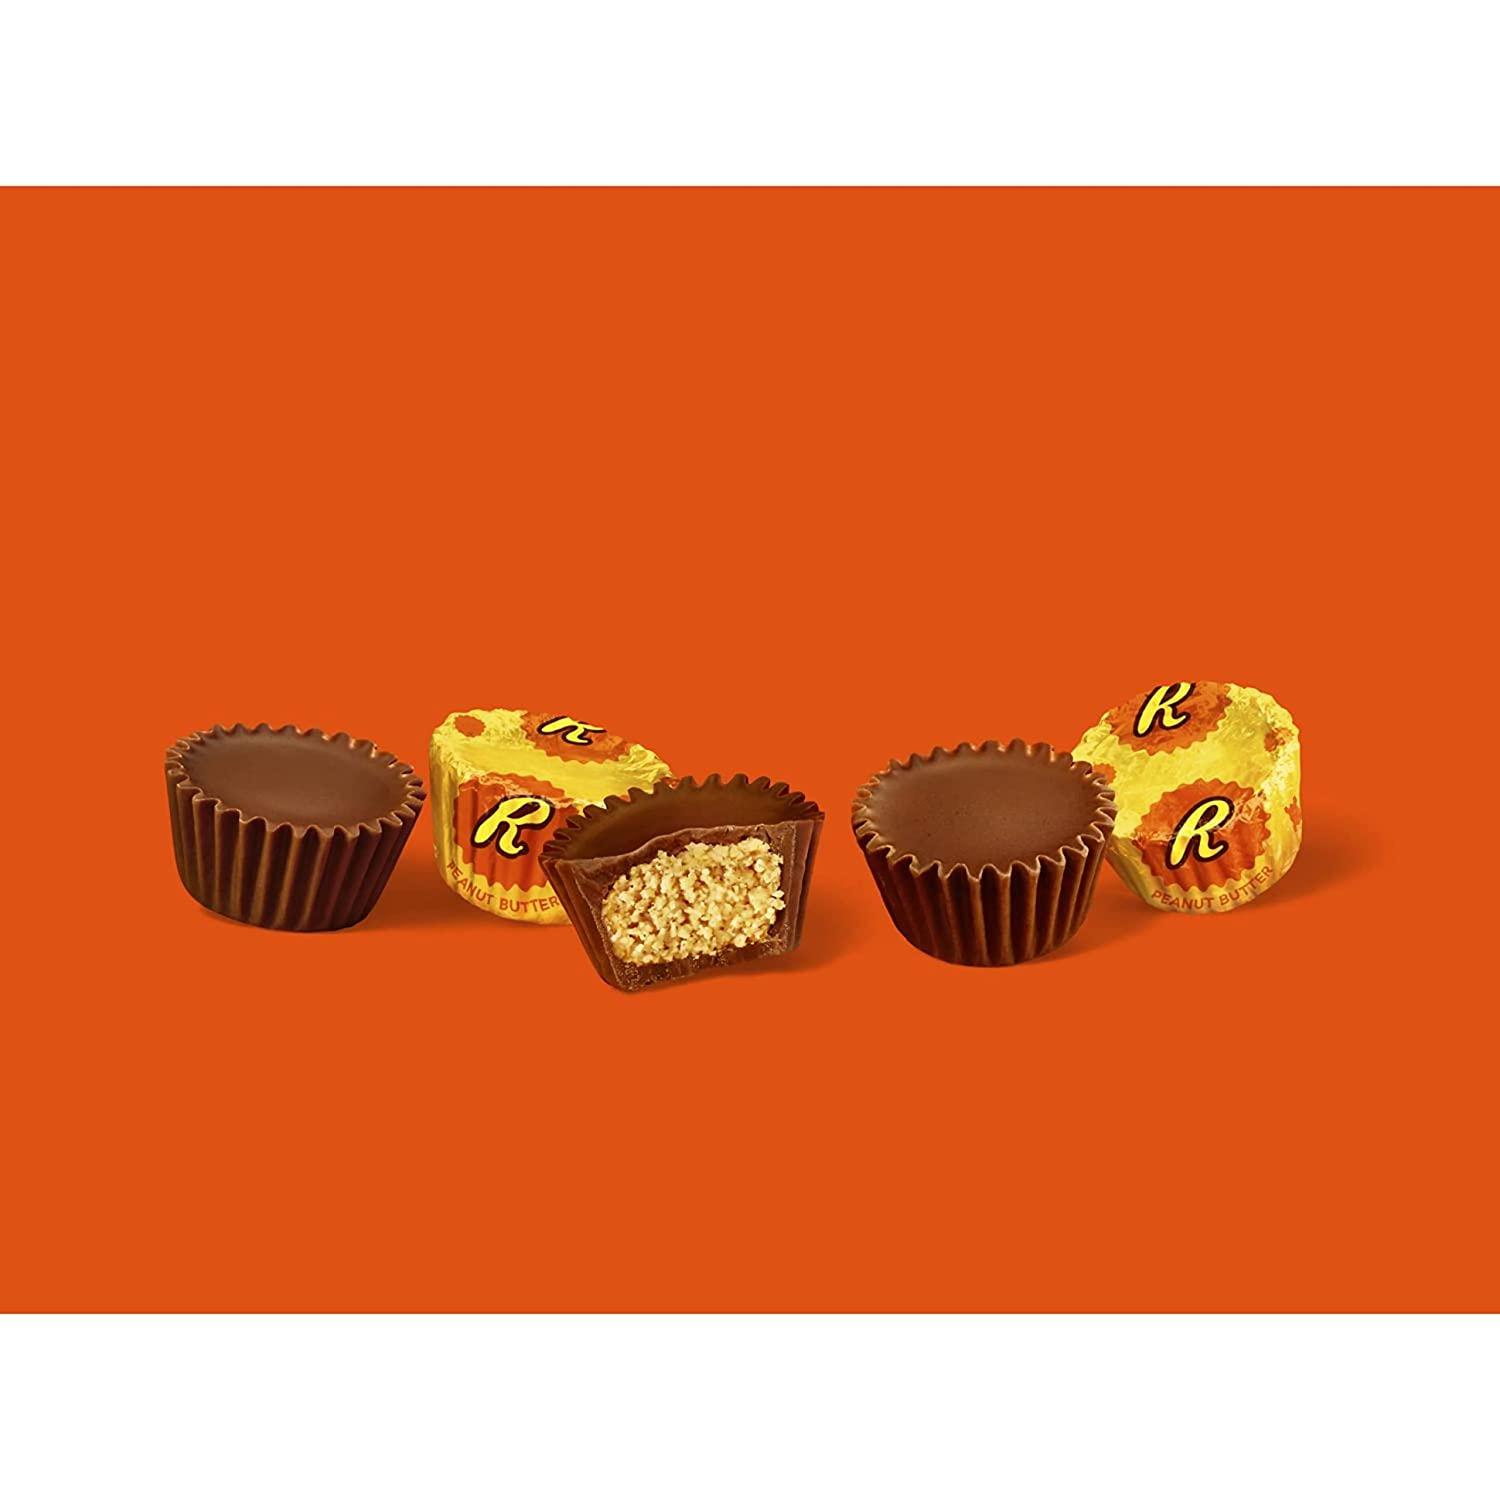 Milk Chocolate Reese's Peanut Butter Miniature Cups Party Pack, 35.6oz